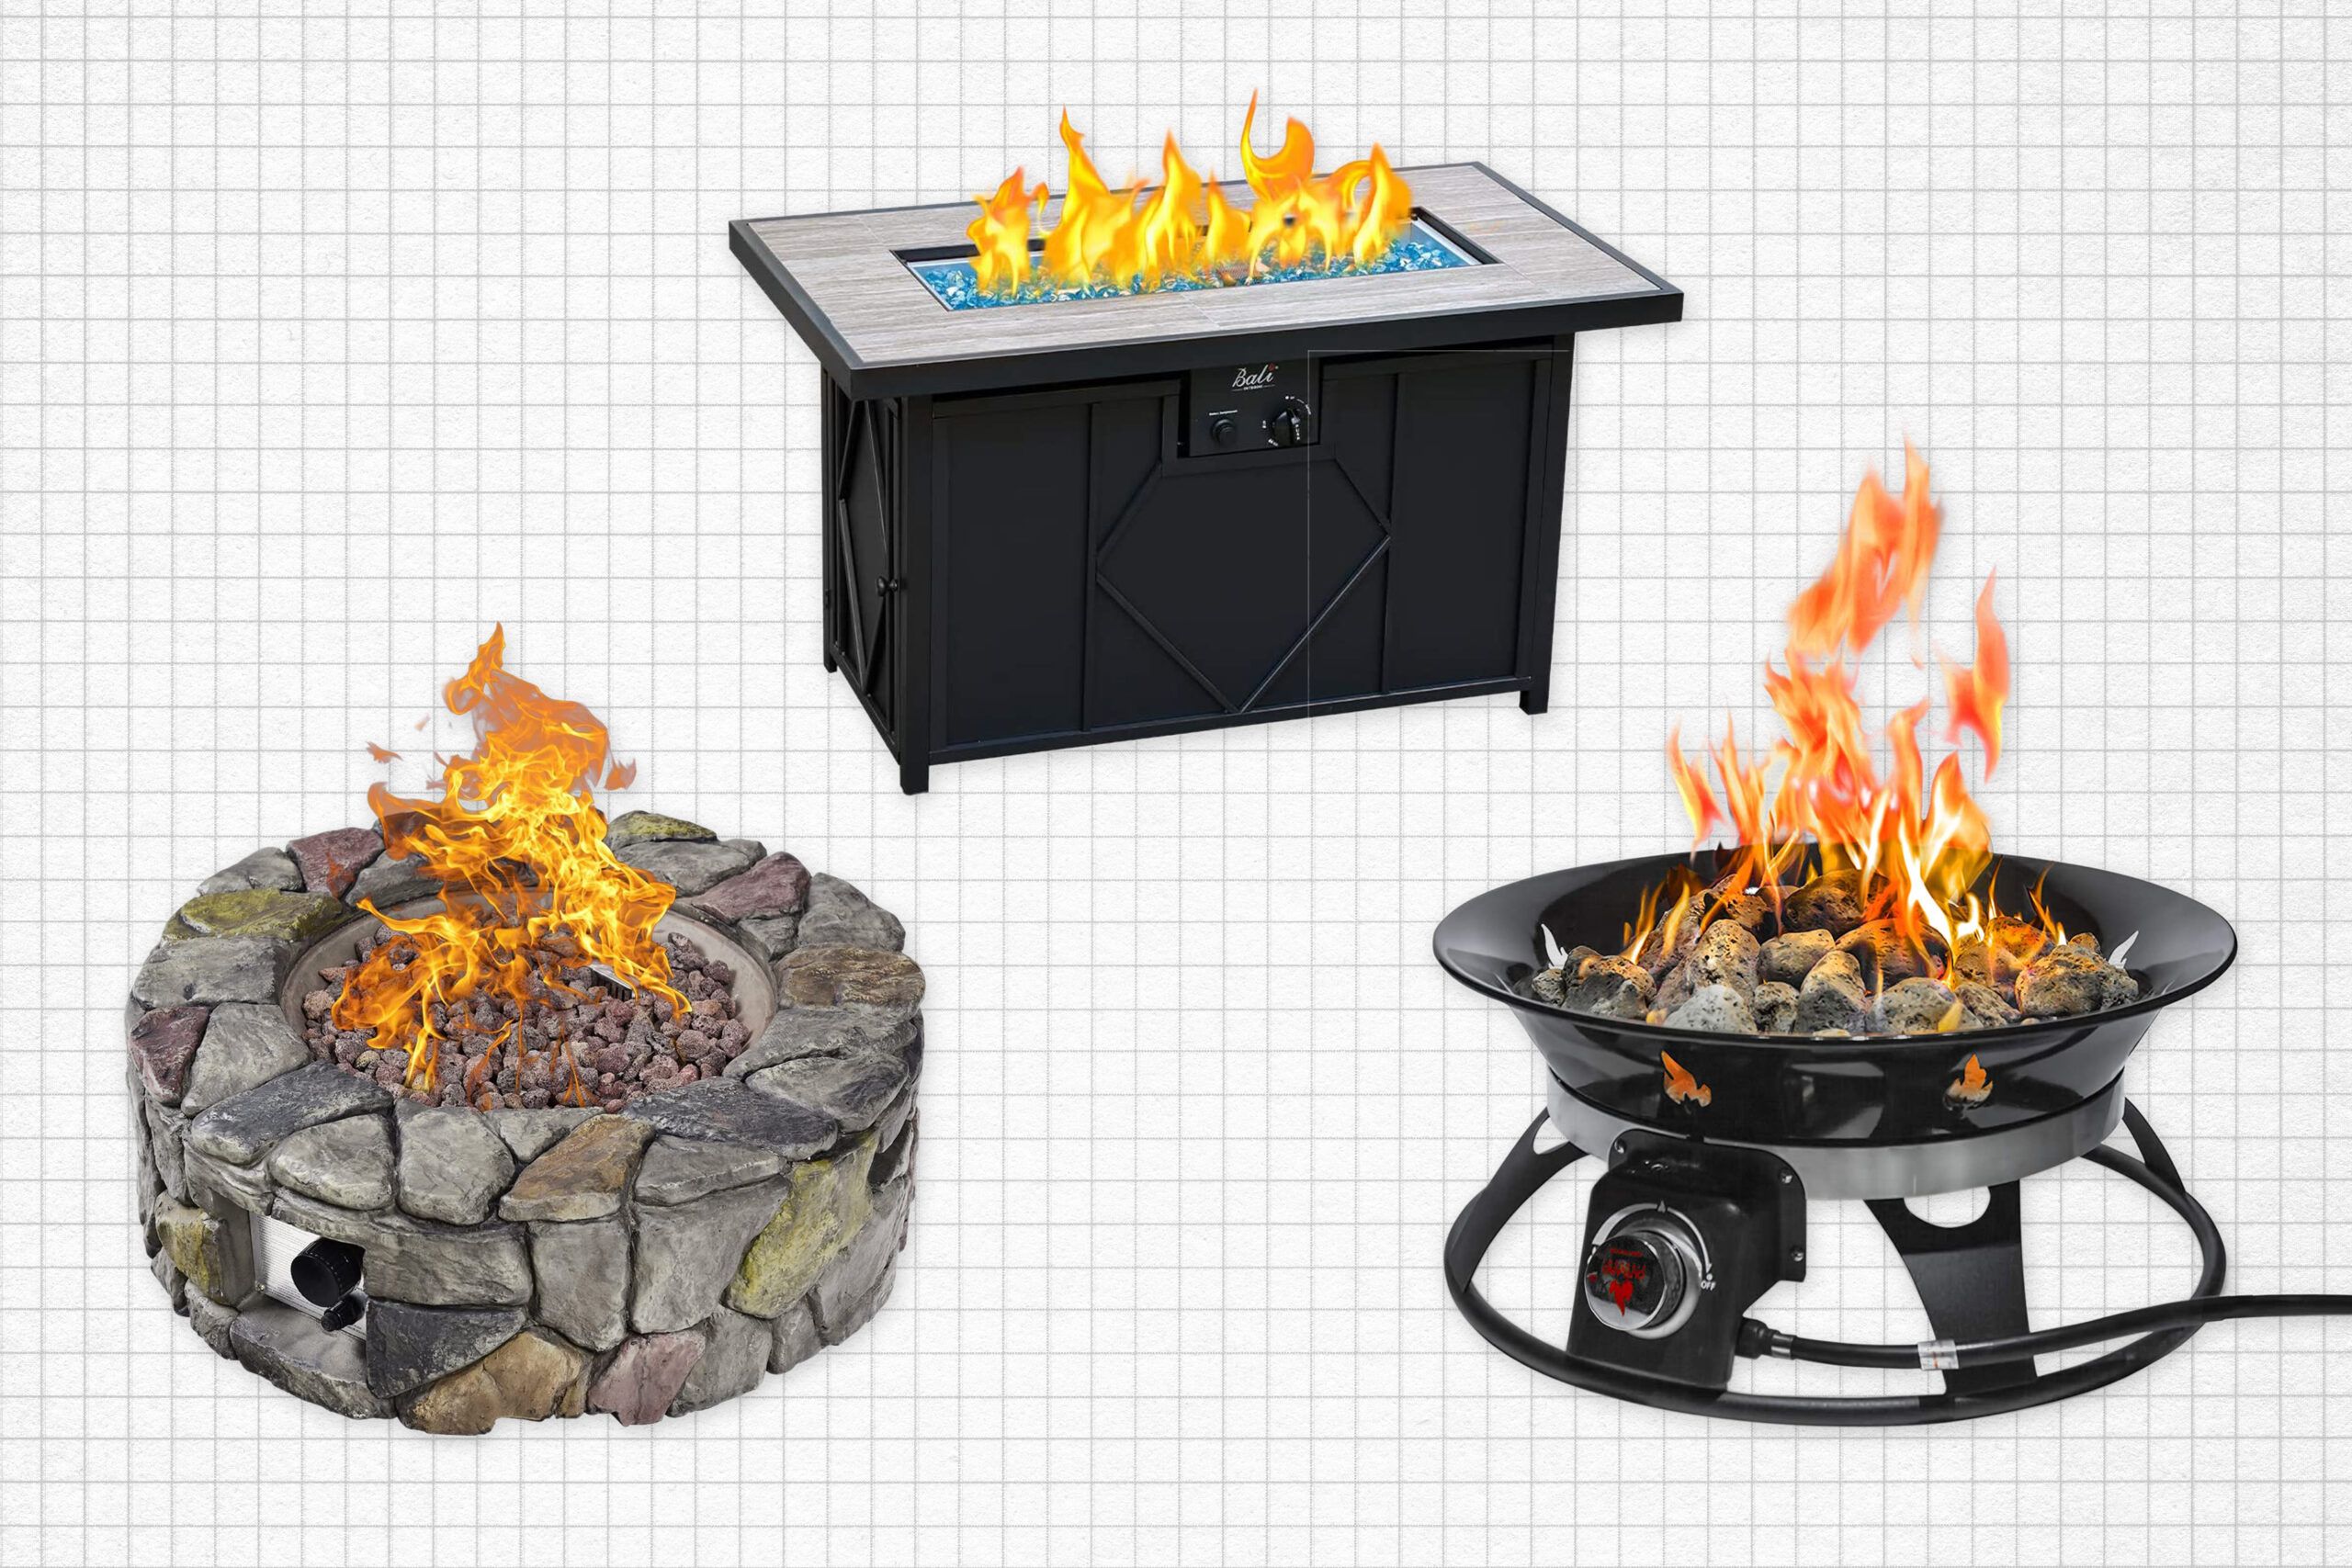 BALI Outdoors Propane Fire Pit, Giantex Propane Fire Pit, and Outland Living Propane Fire Pit isolated on a yellow grid paper background. Best propane fire pit